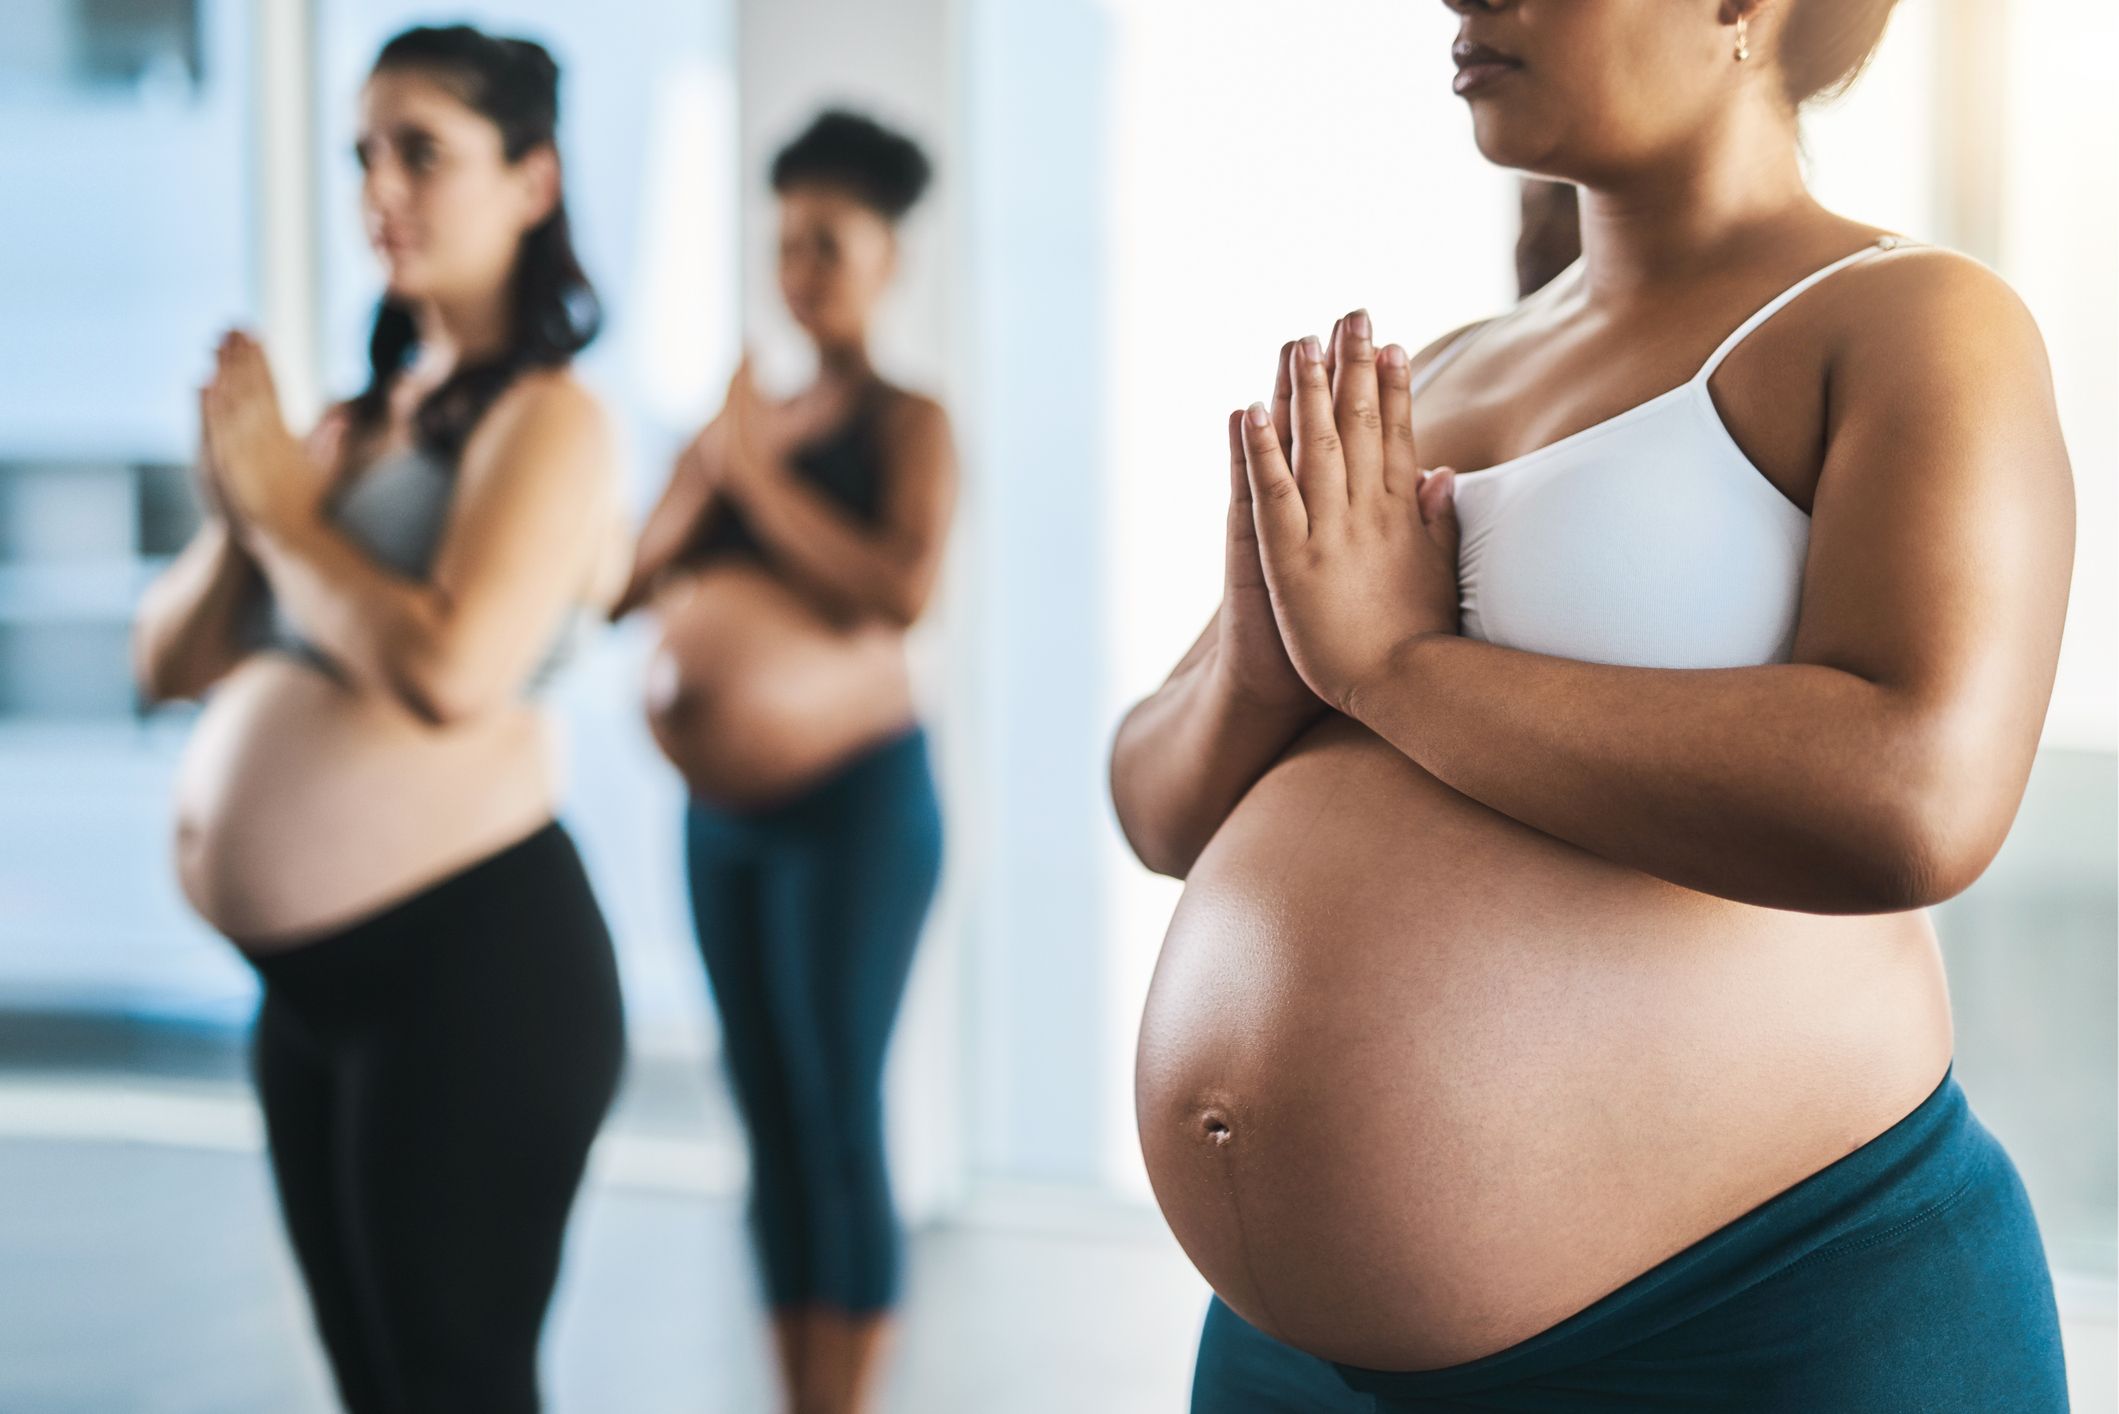 Pregnancy yoga: benefits, safety tips and how to get started